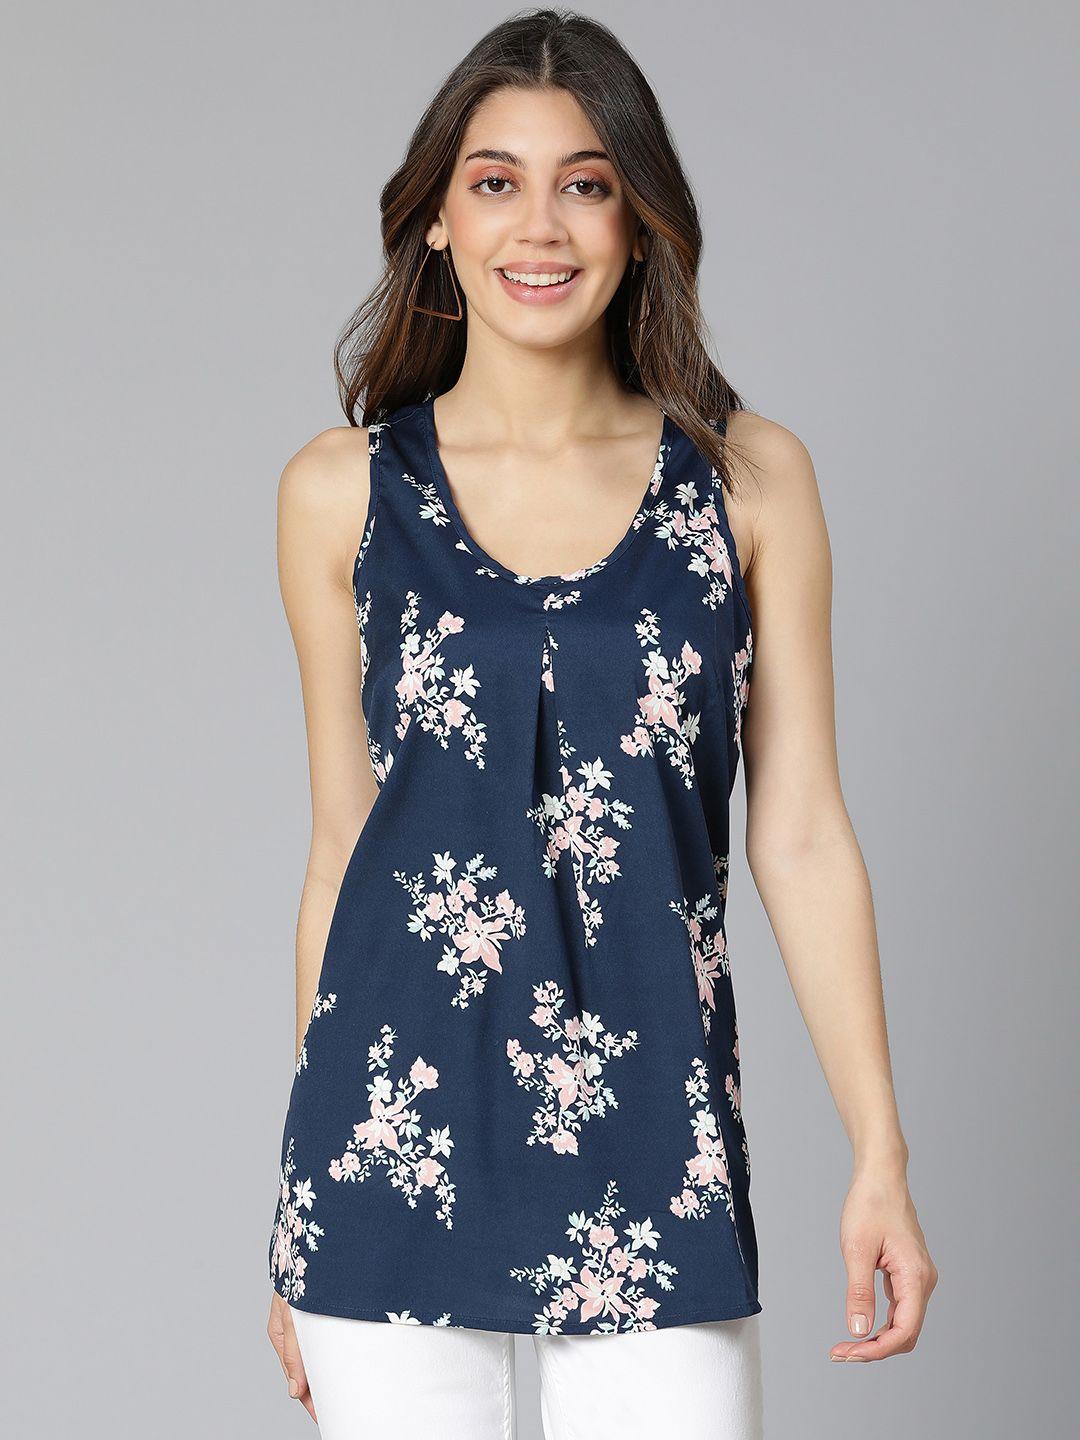 oxolloxo-blue-&-white-floral-print-top